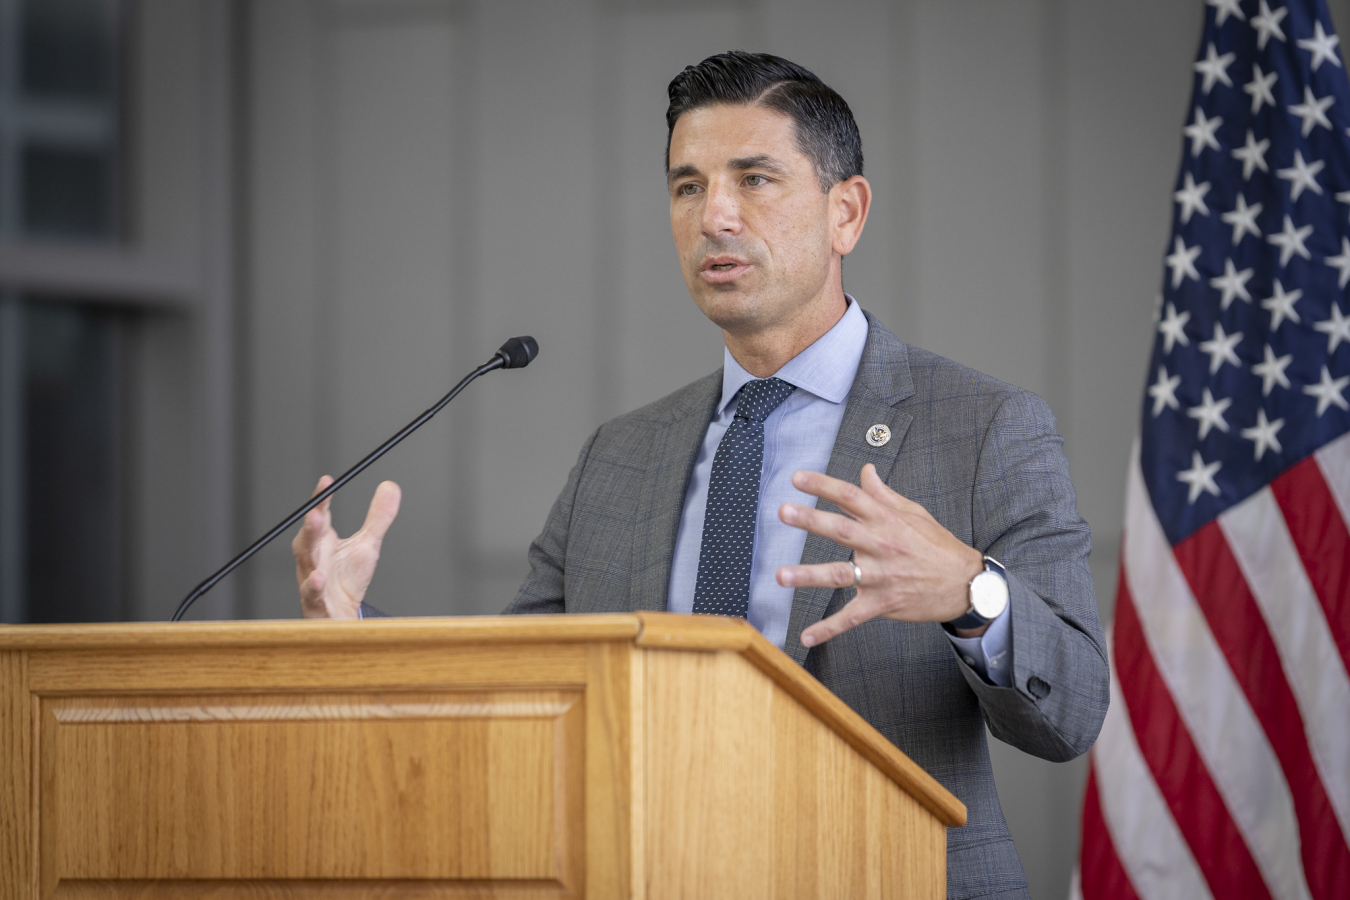 Acting Secretary Chad Wolf in Opening of the DHS Center for Countering Human Trafficking 20 October 2020